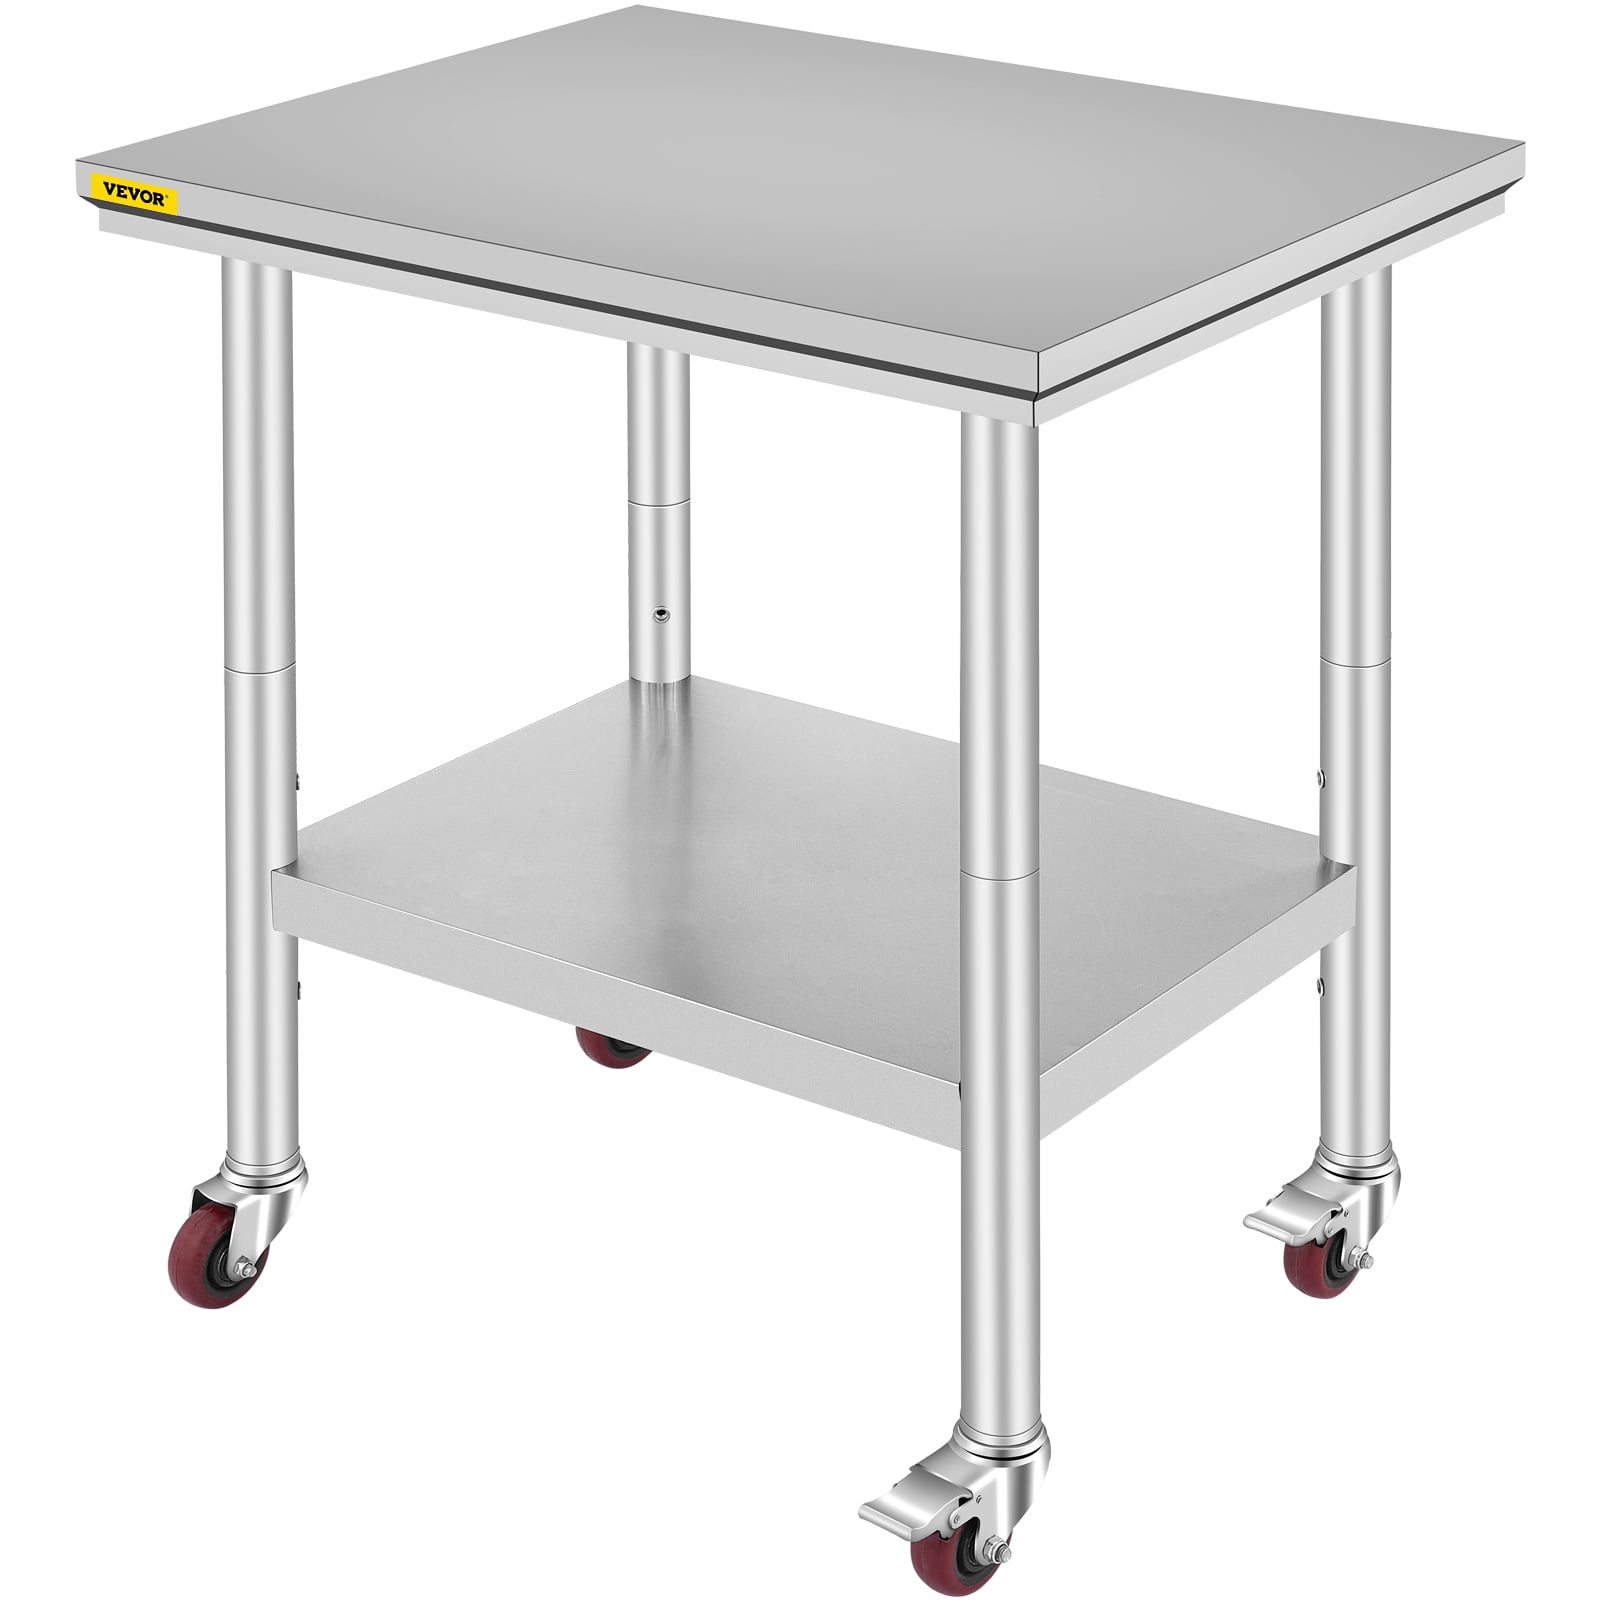 New 30" x 24" Commercial Stainless Steel Kitchen Work Prep Table 30” x 24” NSF 